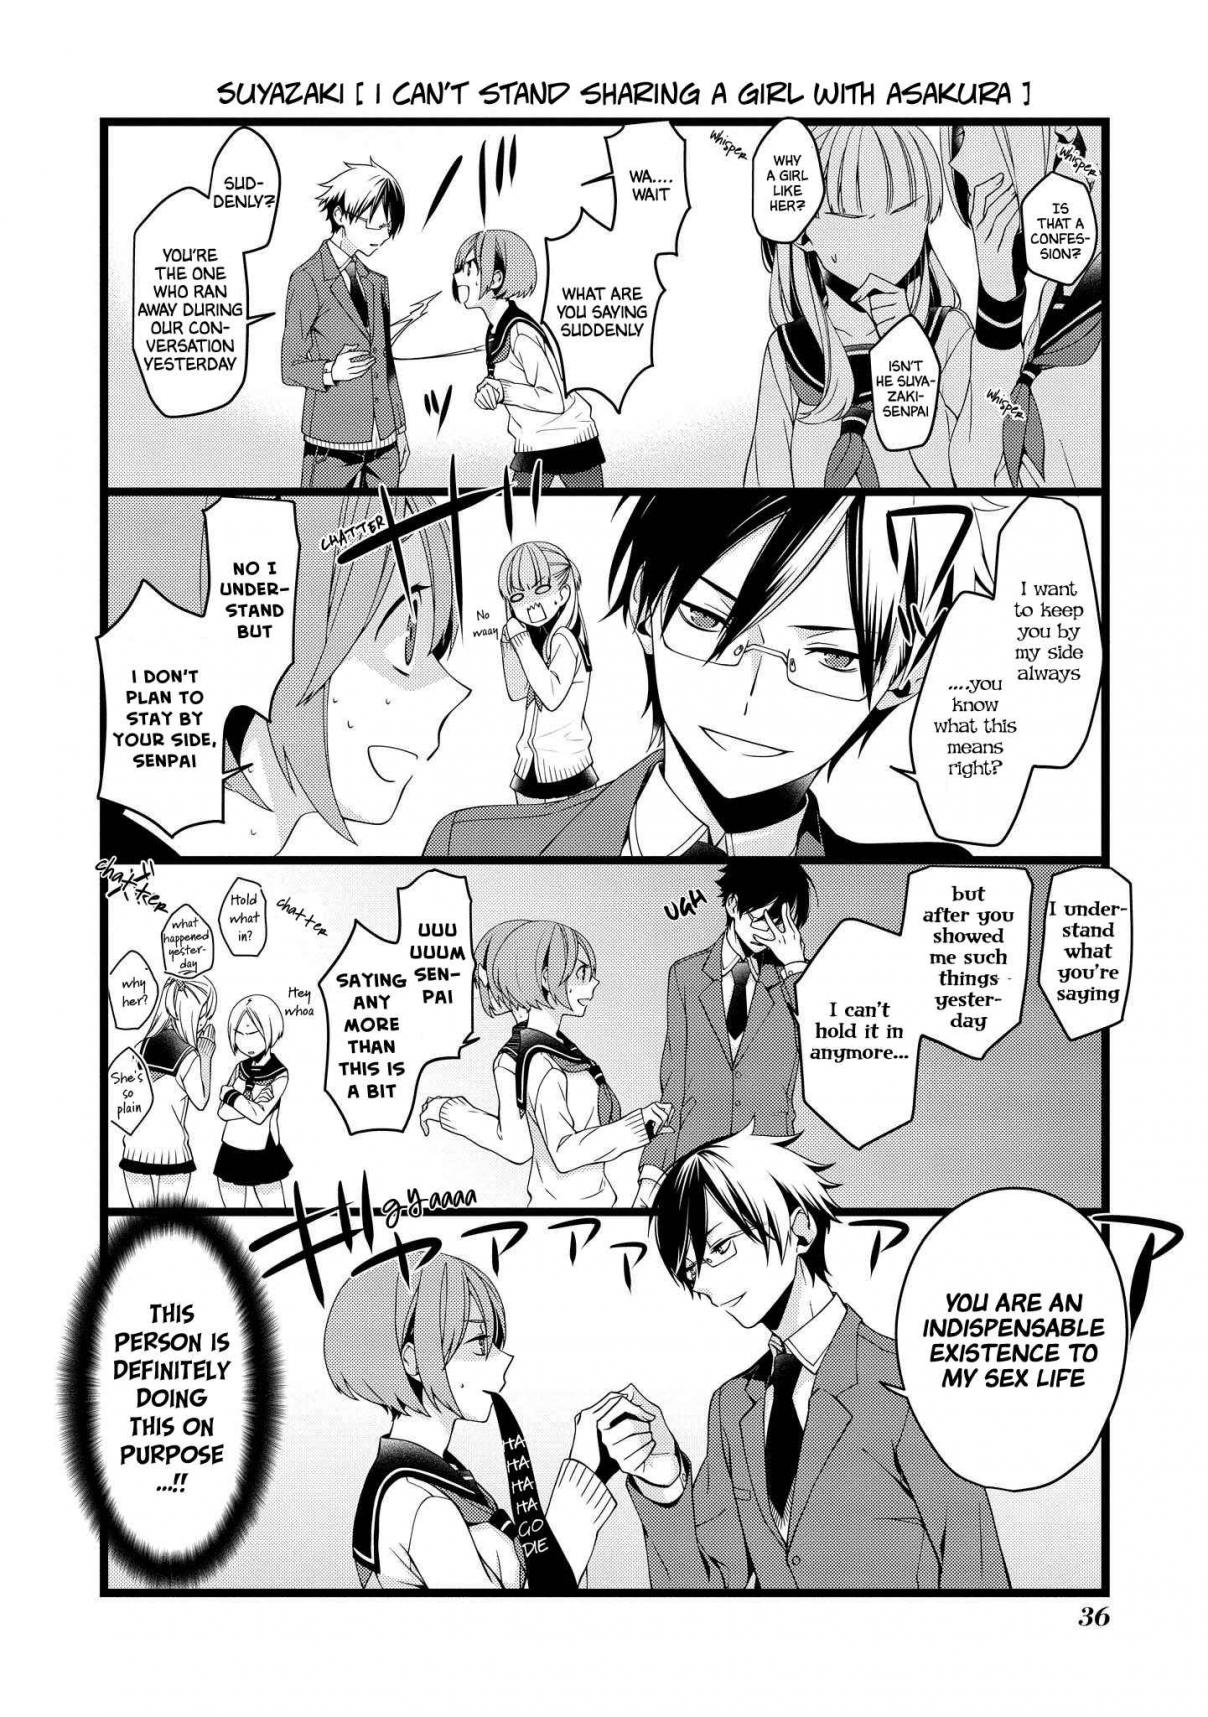 A Pervert in Love is a Demon. Vol. 1 Ch. 5 The Next Day